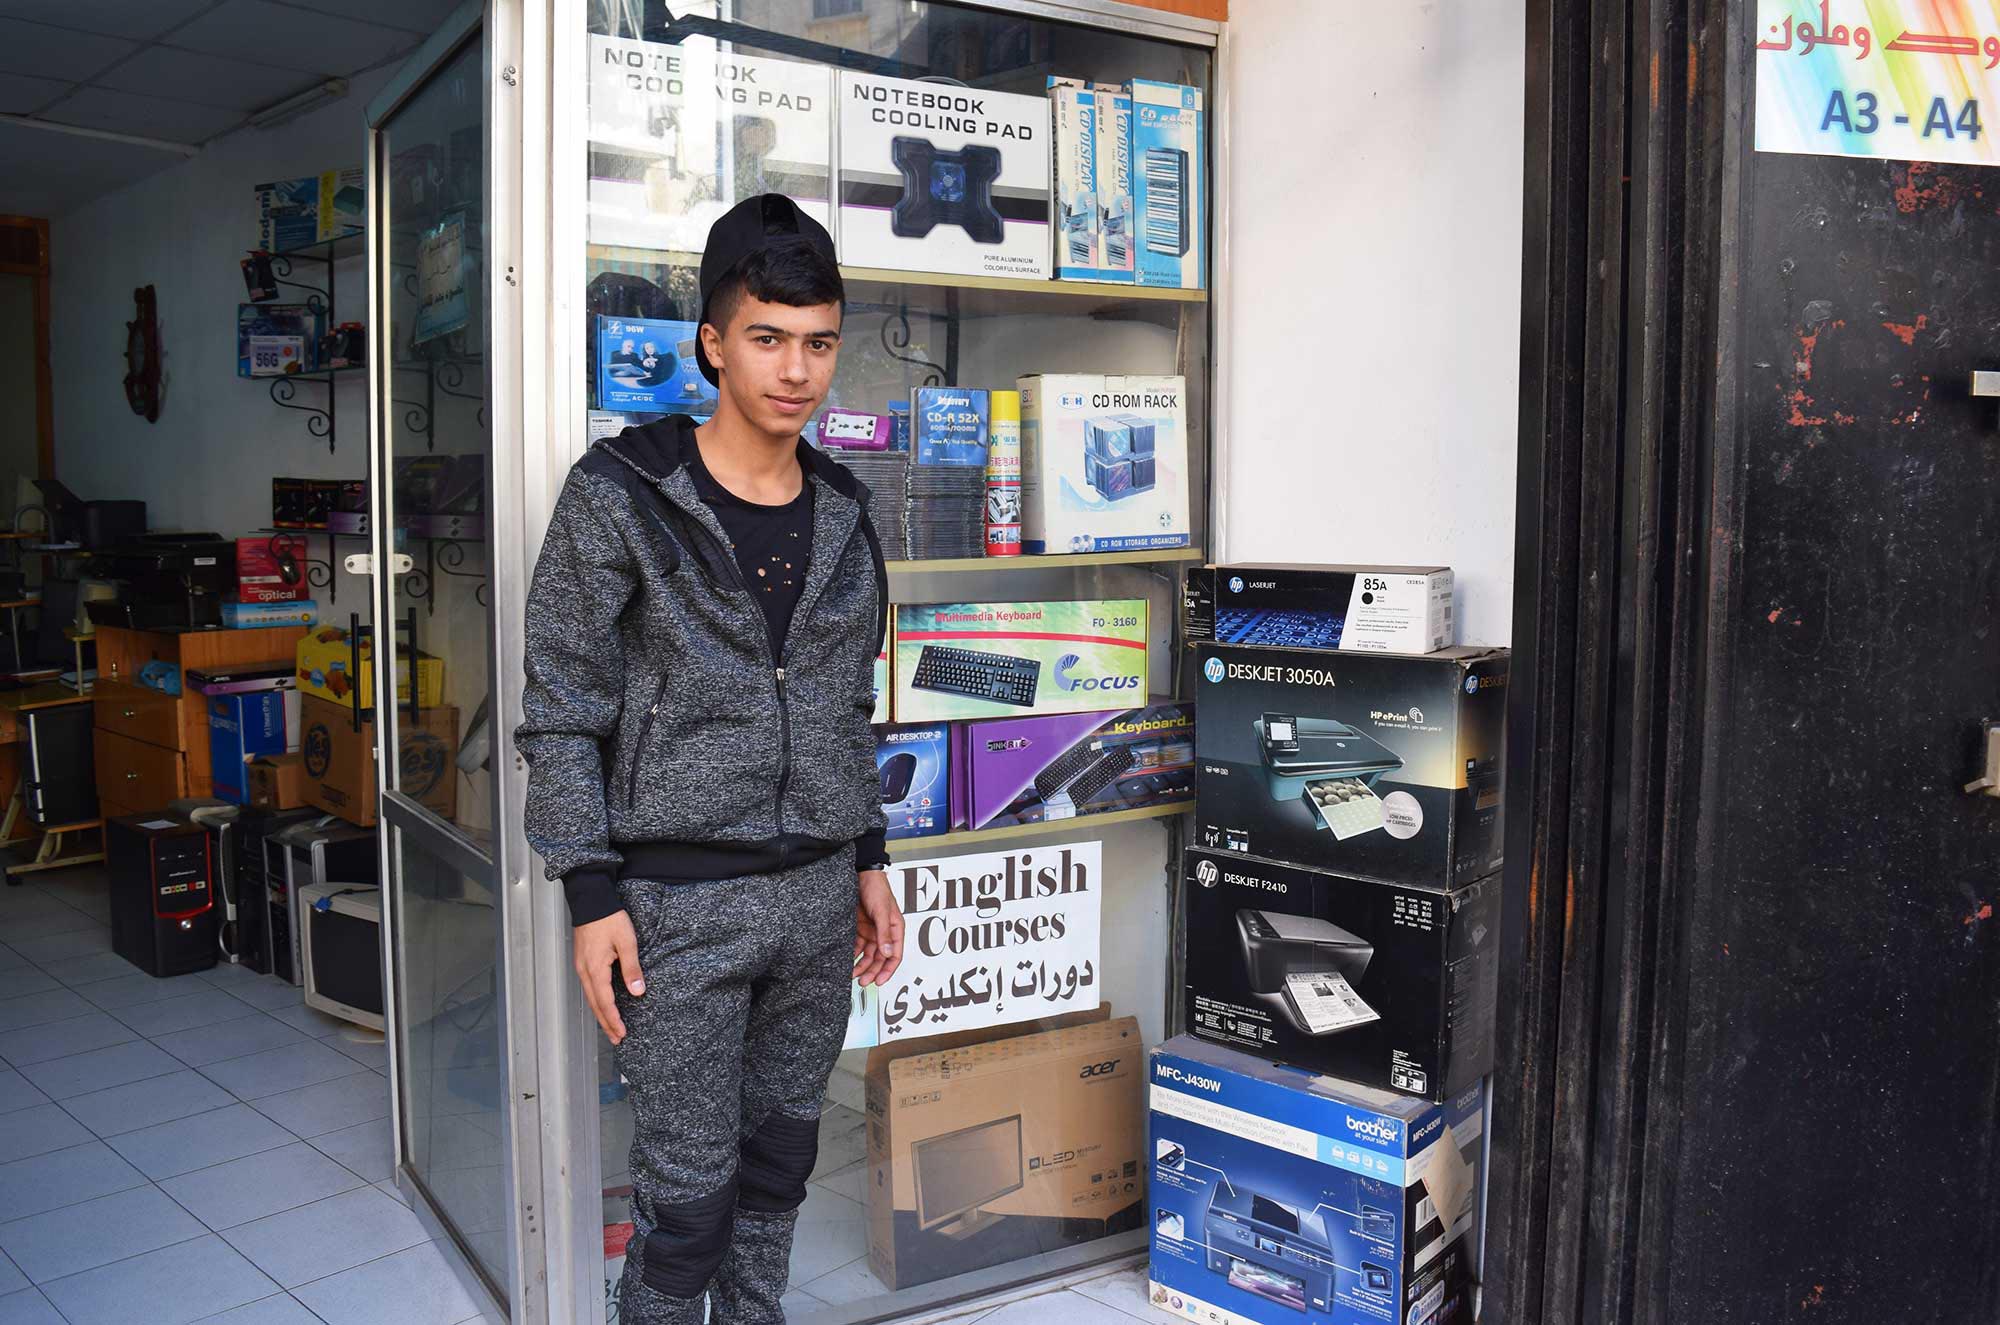 Khaled stands in front of the computer shop where he works.